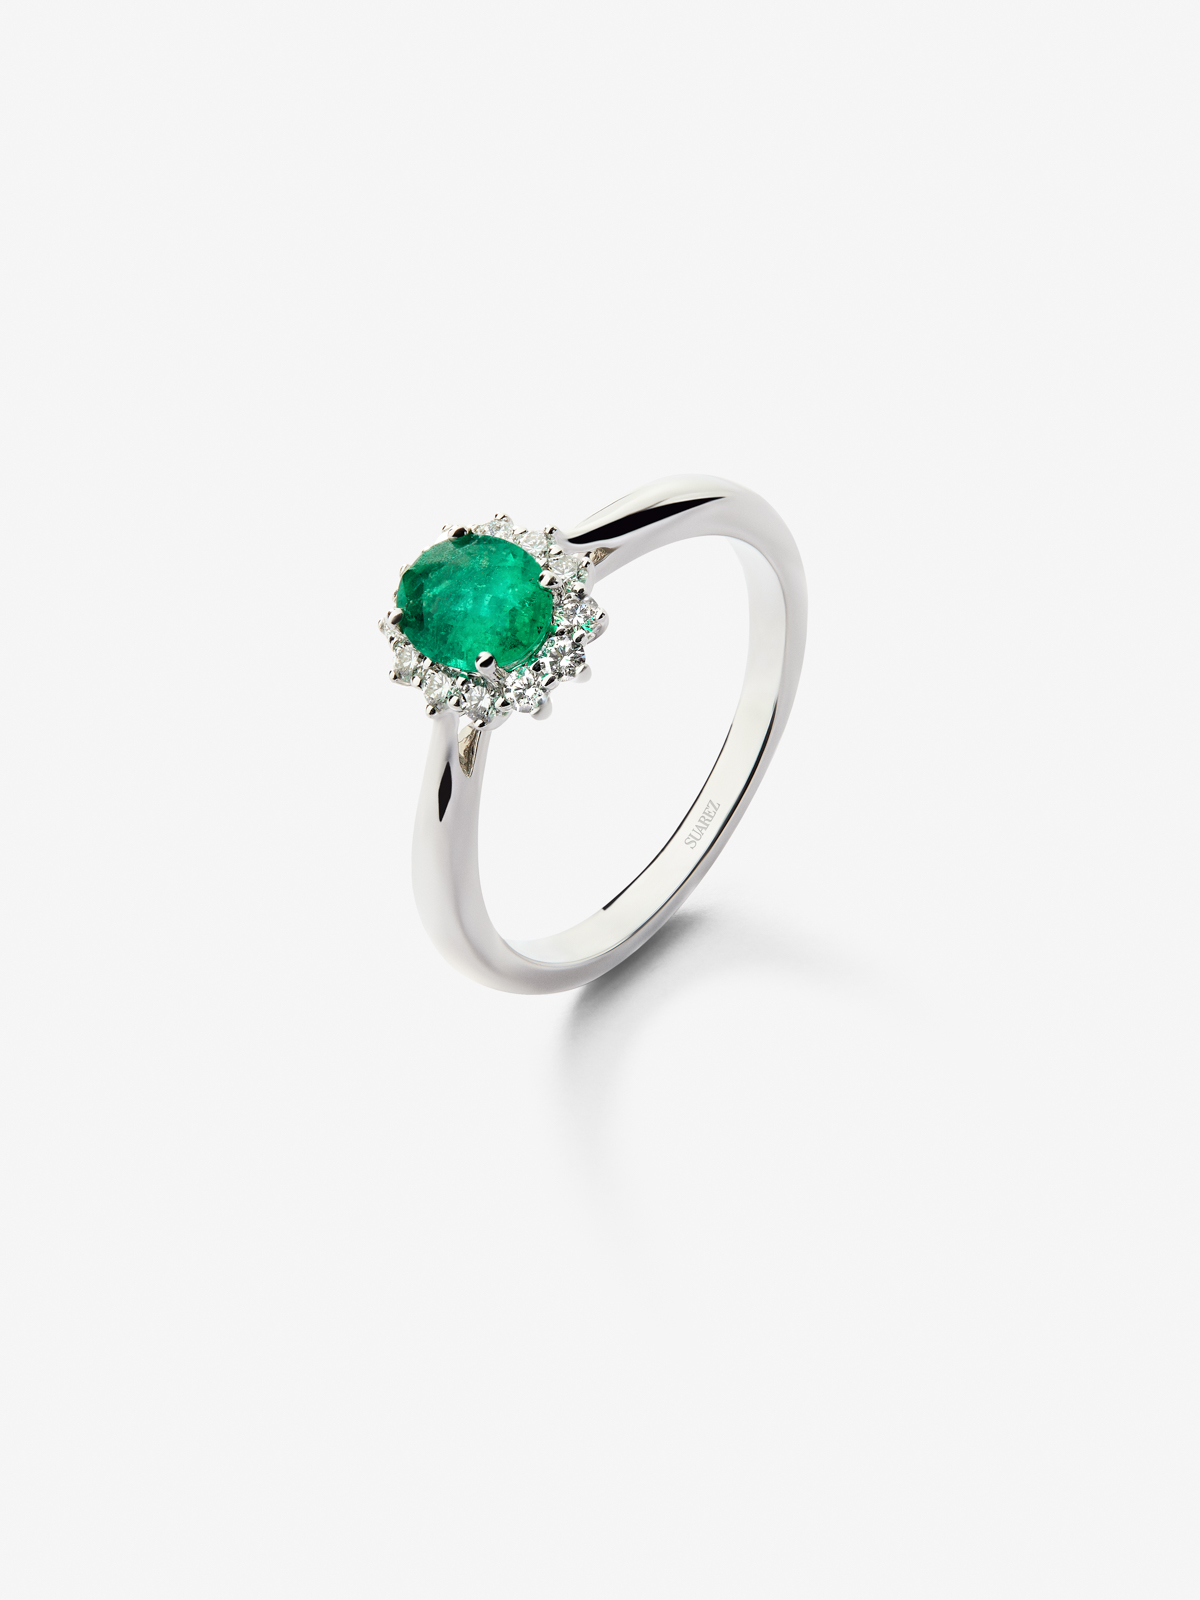 18K white gold ring with green emerald in oval size of 0.3 cts and white diamonds in 0.24 cts bright size